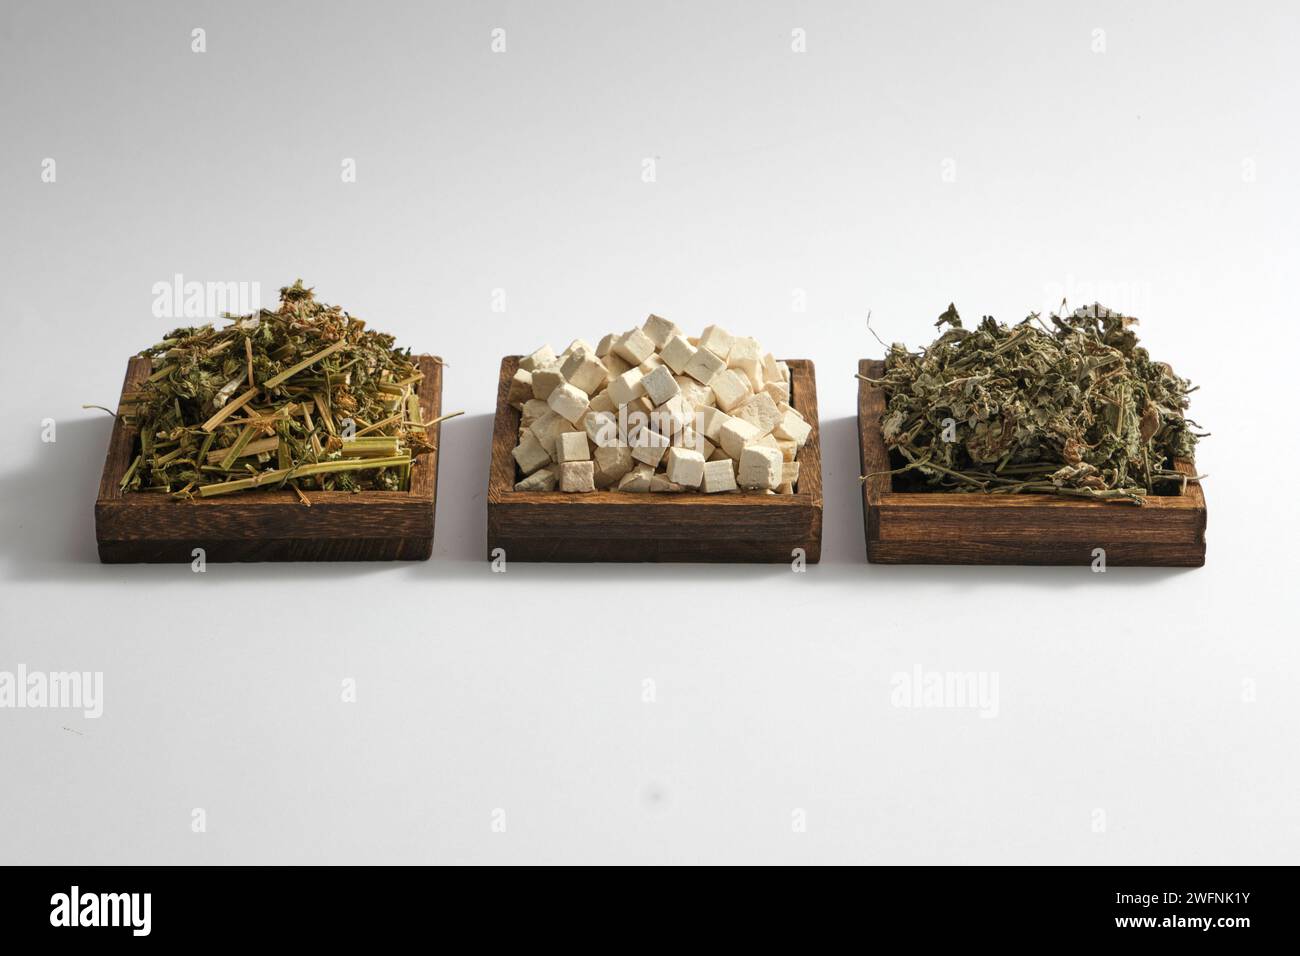 Some square wooden trays with Chinese motherwort, Poria cocos and Mugwort displayed on. White background. Herbs useful in treat health problems Stock Photo